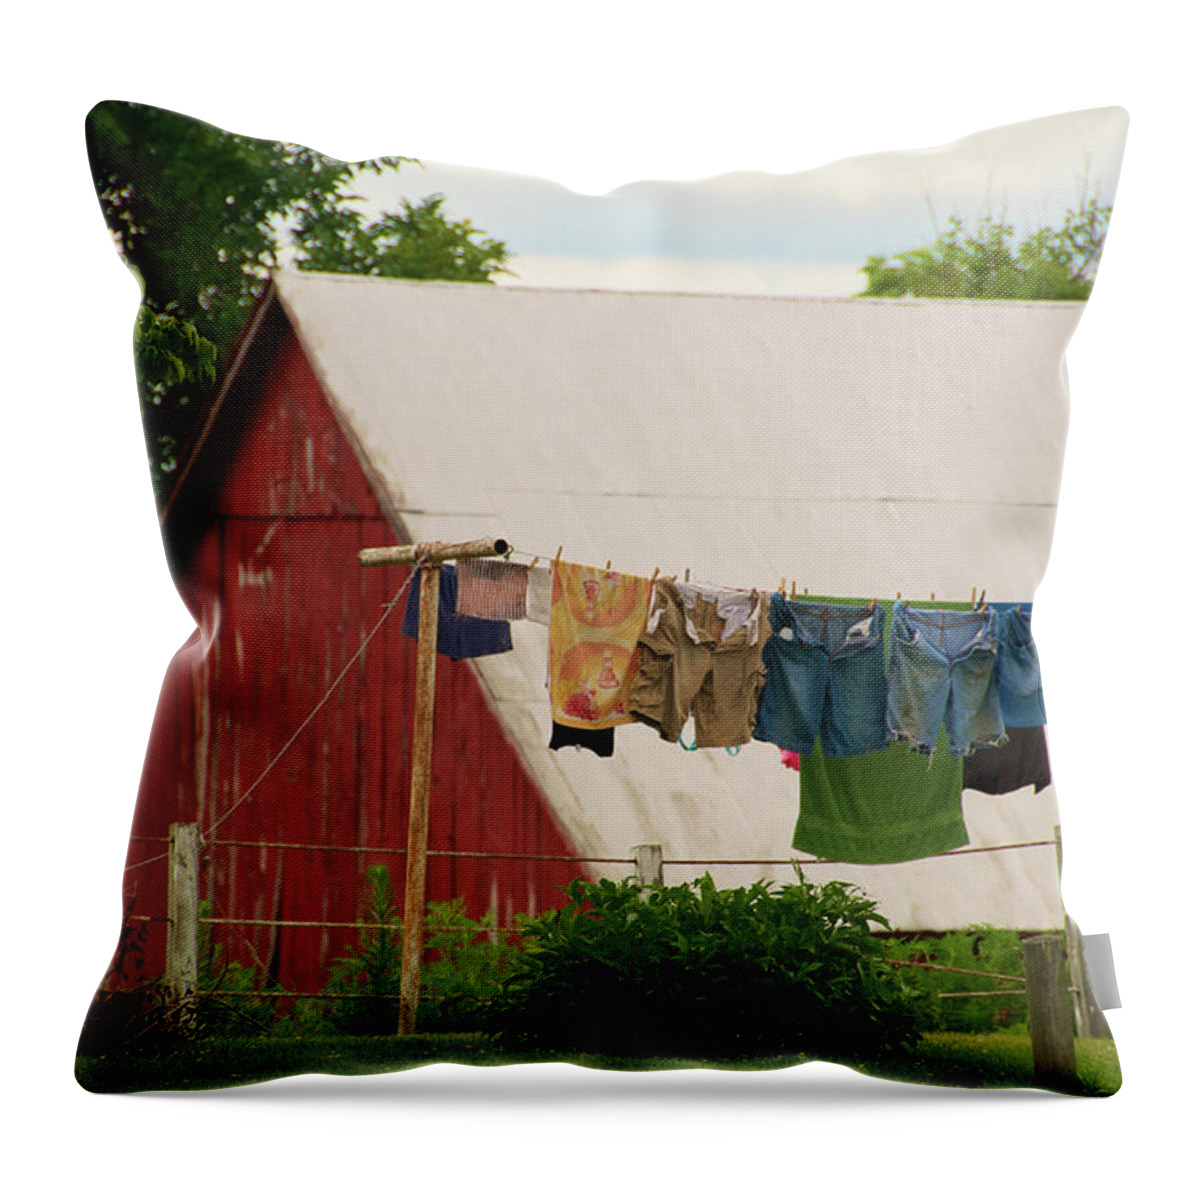 Kentucky Throw Pillow featuring the photograph Wash Day by Melissa Southern